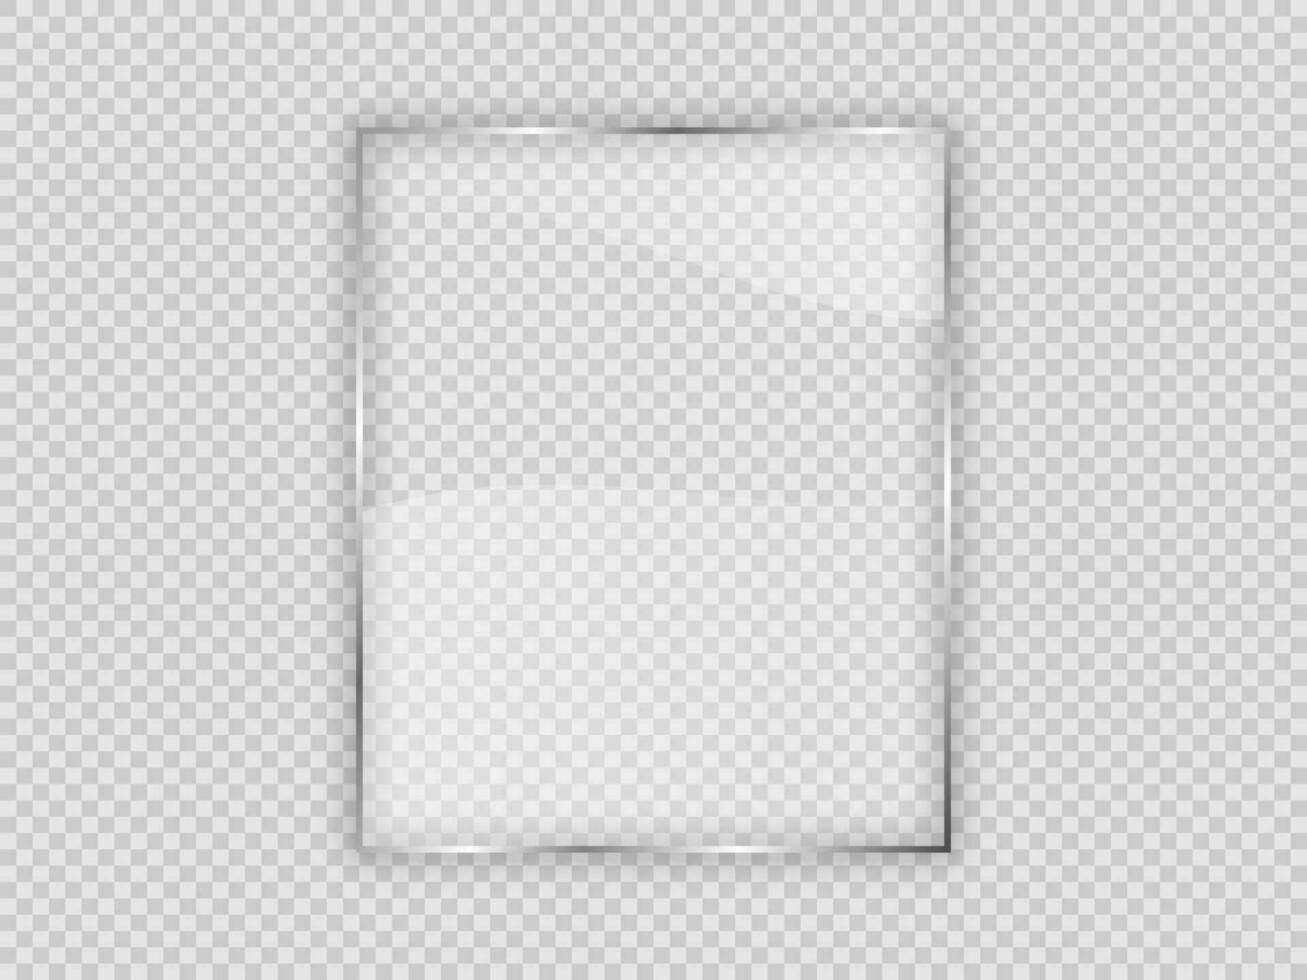 Glass plate in vertical frame vector